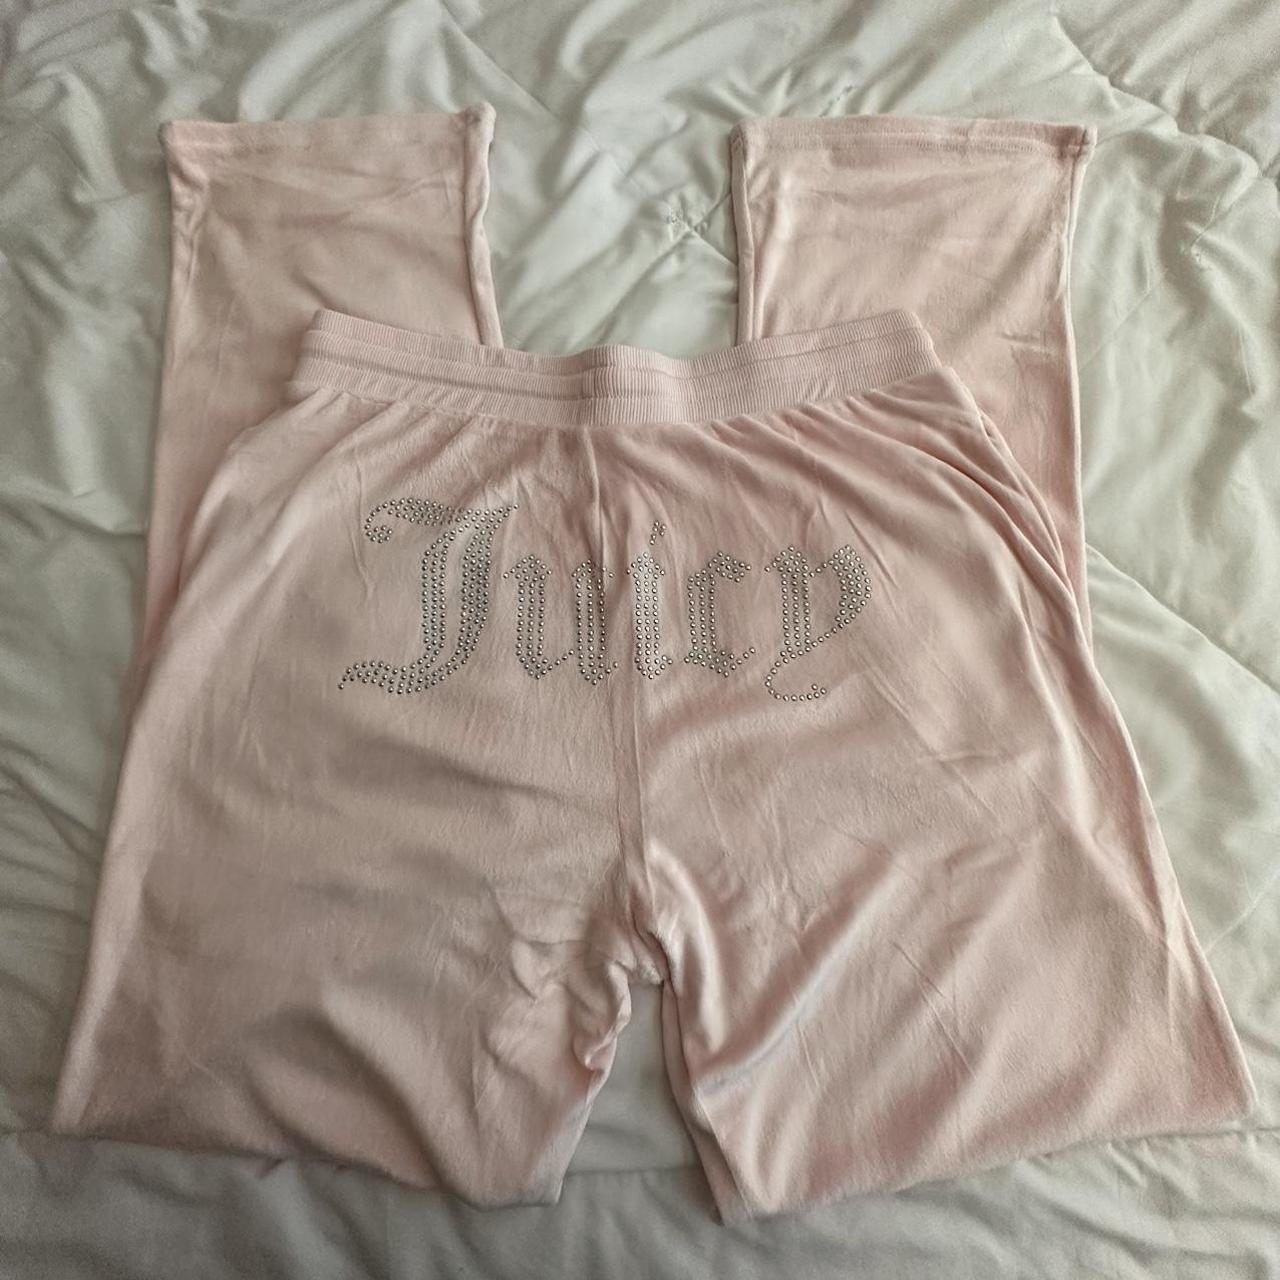 Vintage Juicy Couture Terry Cloth Sweatsuit - Pink | Garmentory